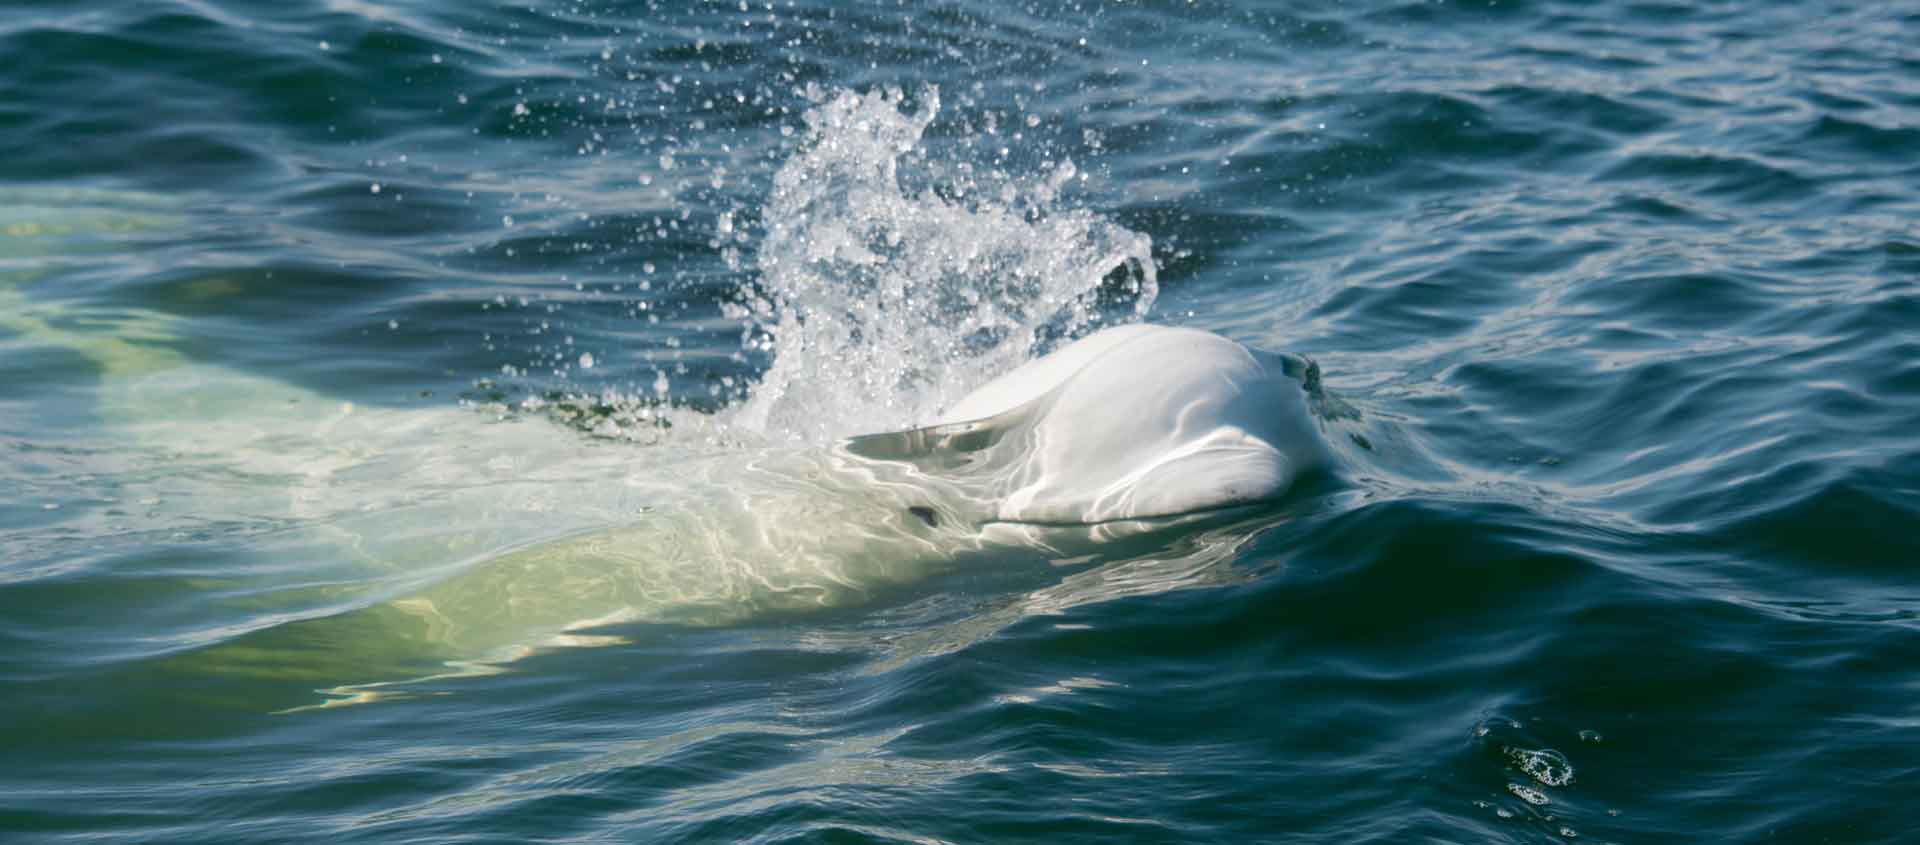 Baffin Island and Greenland picture of a Beluga Whale.